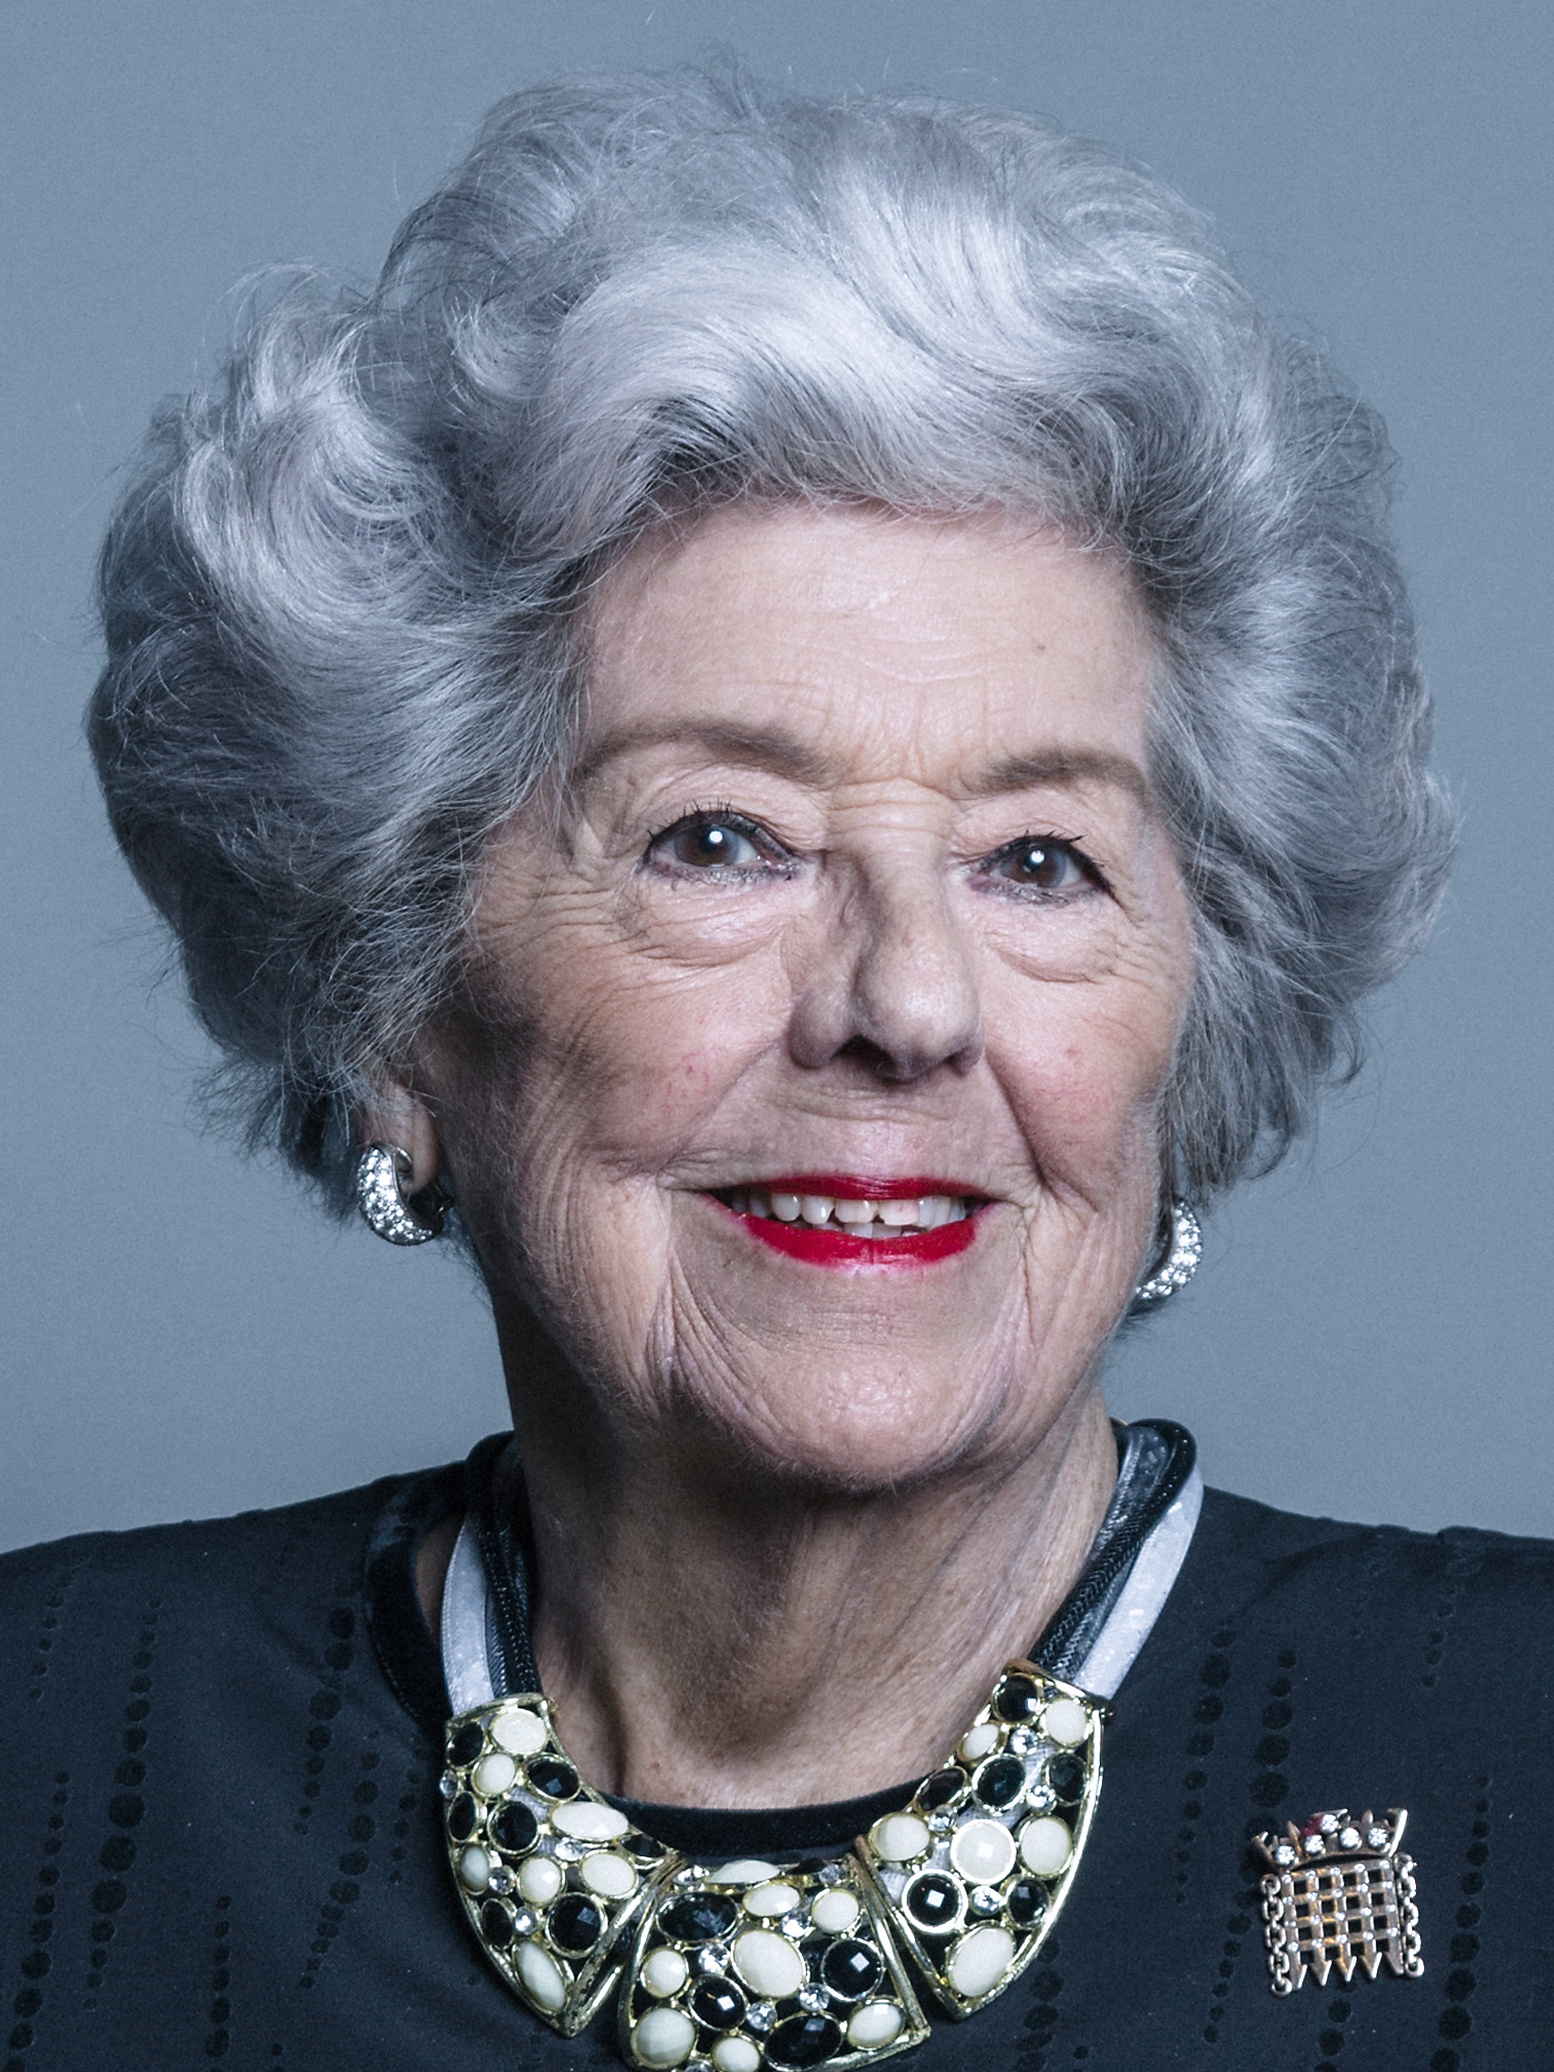 Photograph of a white woman's shoulders and face. She has light eyes, wrinkles, grey short styled hair. She is wearing red lipstick, earrings, a large necklace decorated with black and white gems, a portcullis broach. The background is grey.